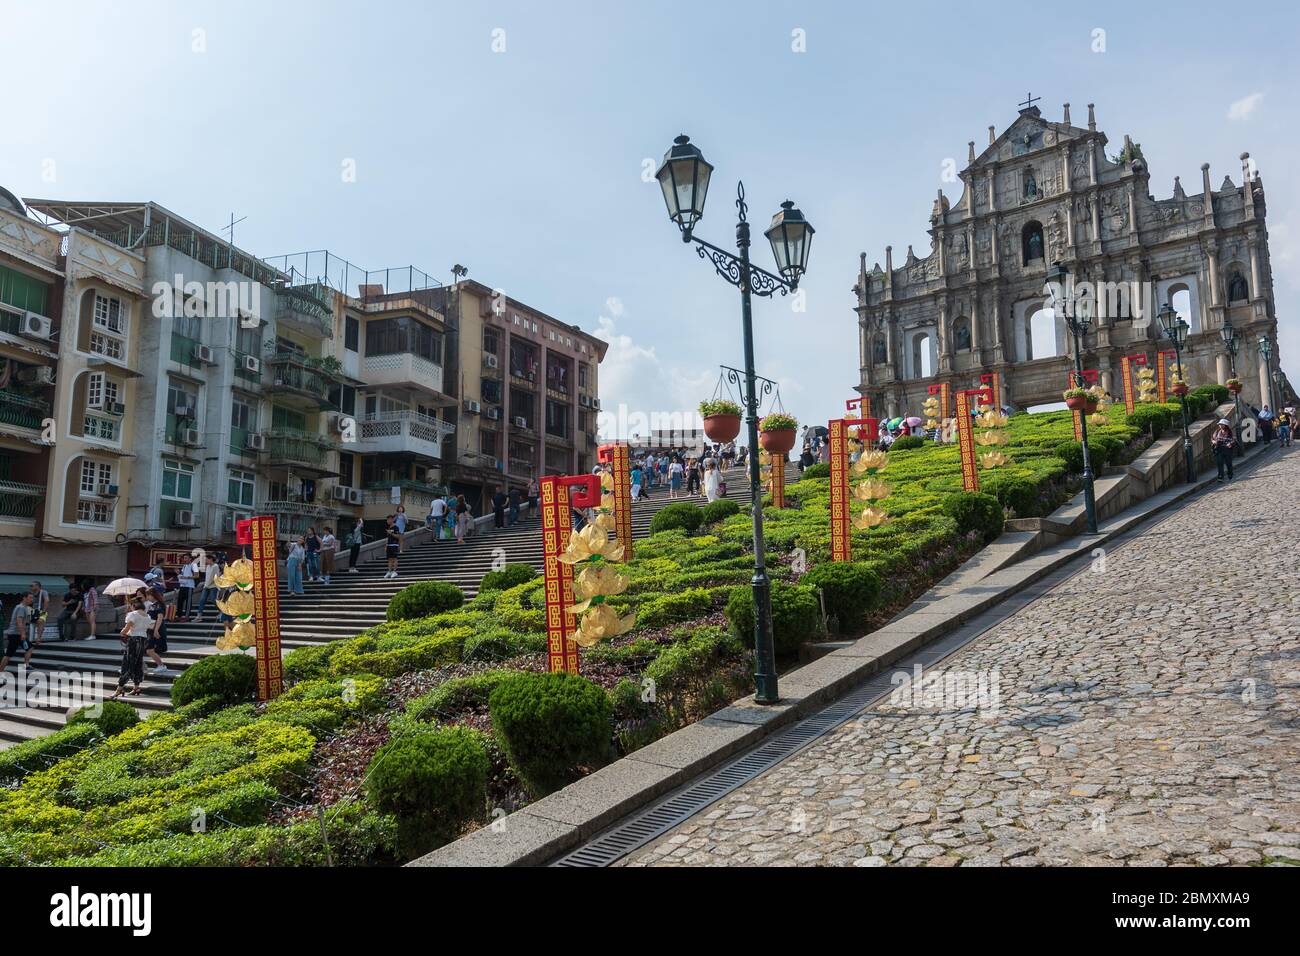 Macau, China - May 16, 2020: It is a popular tourist attraction of Asia. View of the Ruins of St. Paul's Cathedral in Macau. Stock Photo